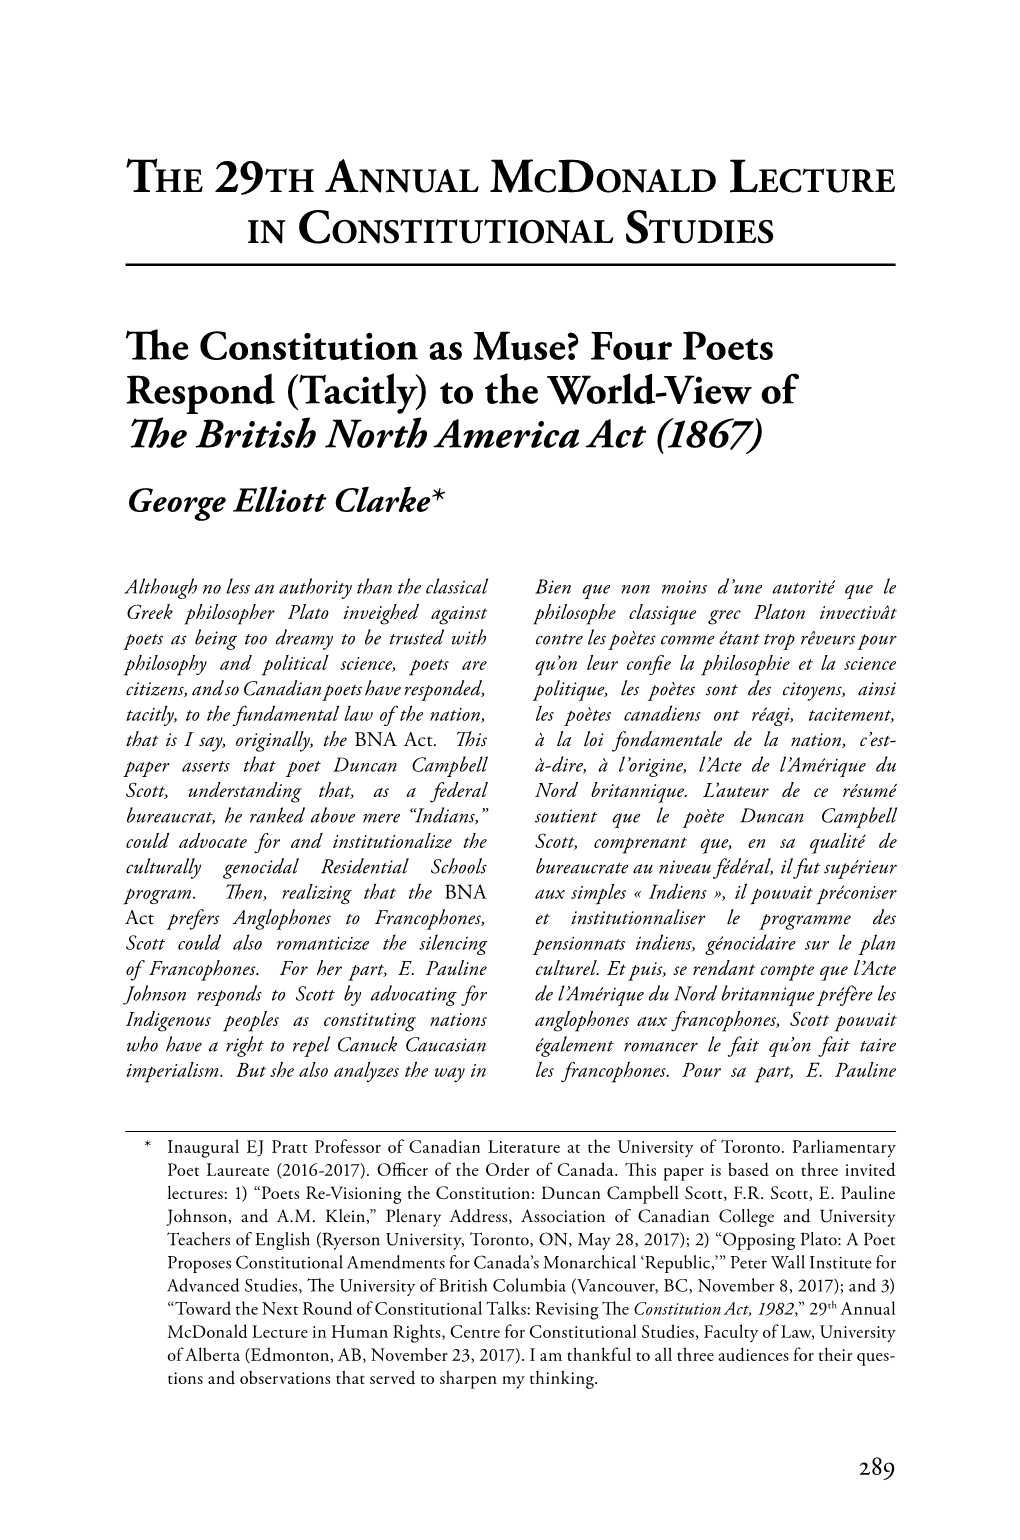 Four Poets Respond (Tacitly) to the World-View of the British North